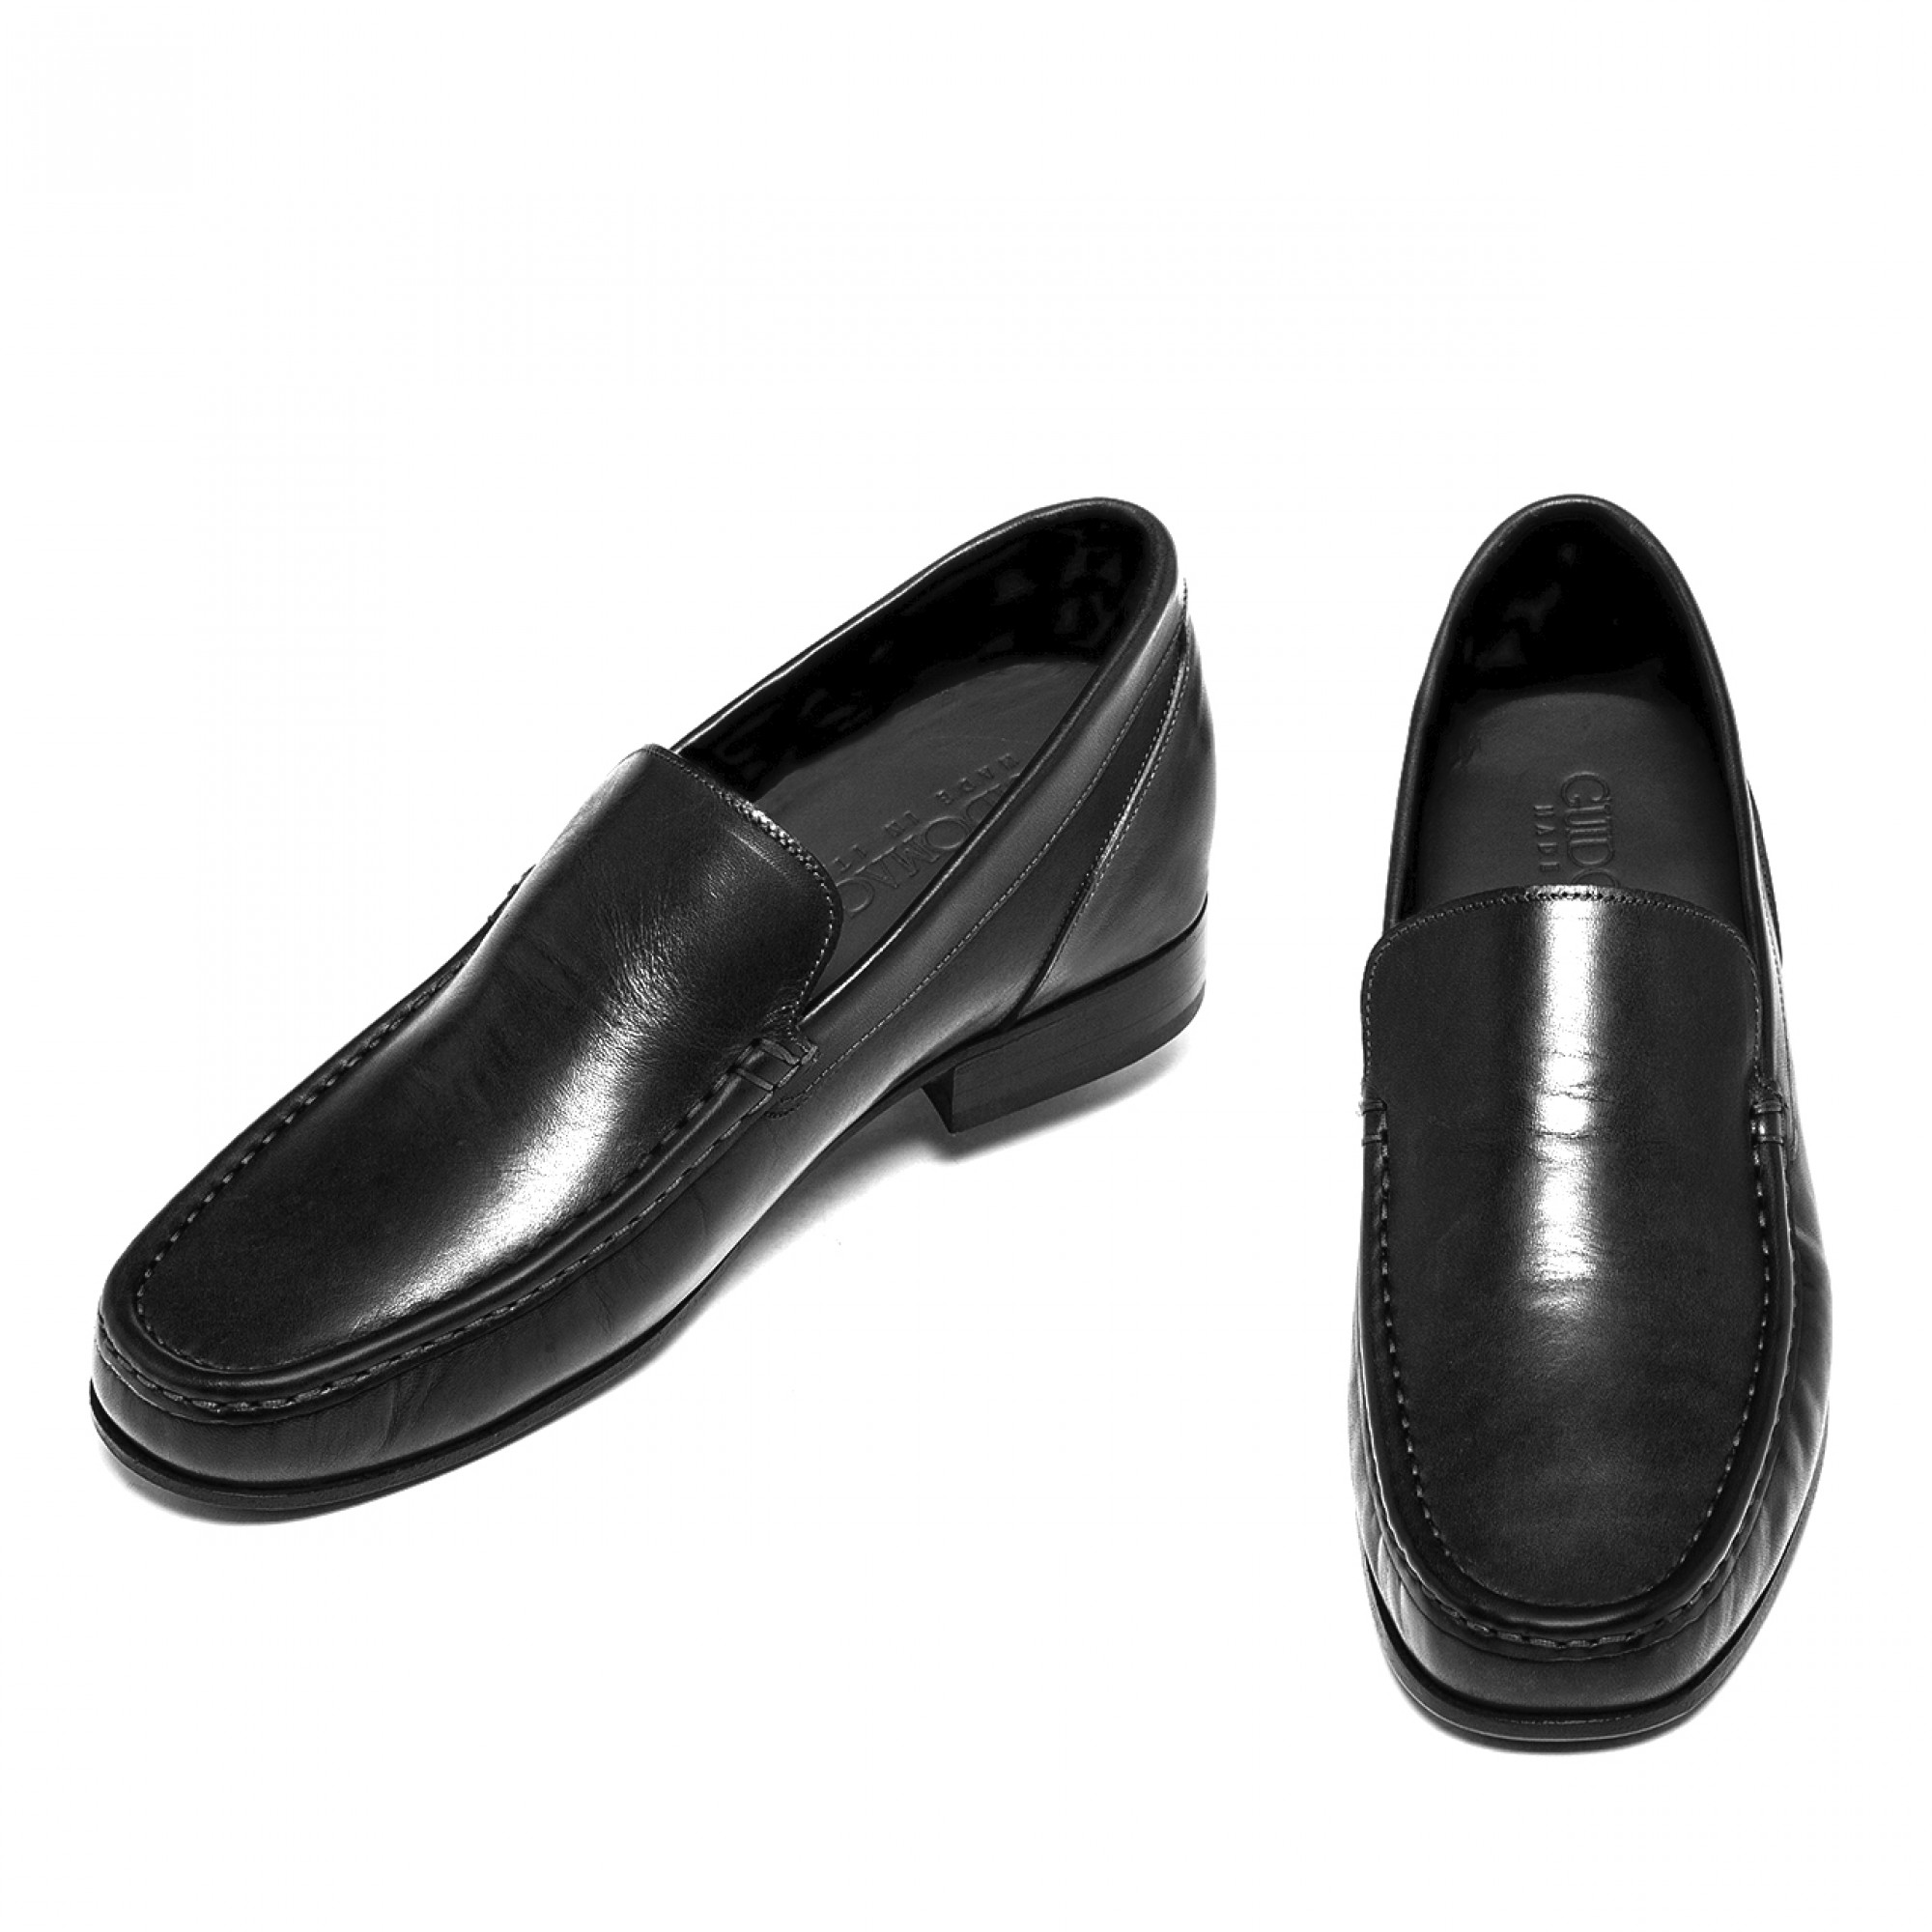 Ashgabat - Elevator Loafers in Cordovan Leather up to 2.6 inches